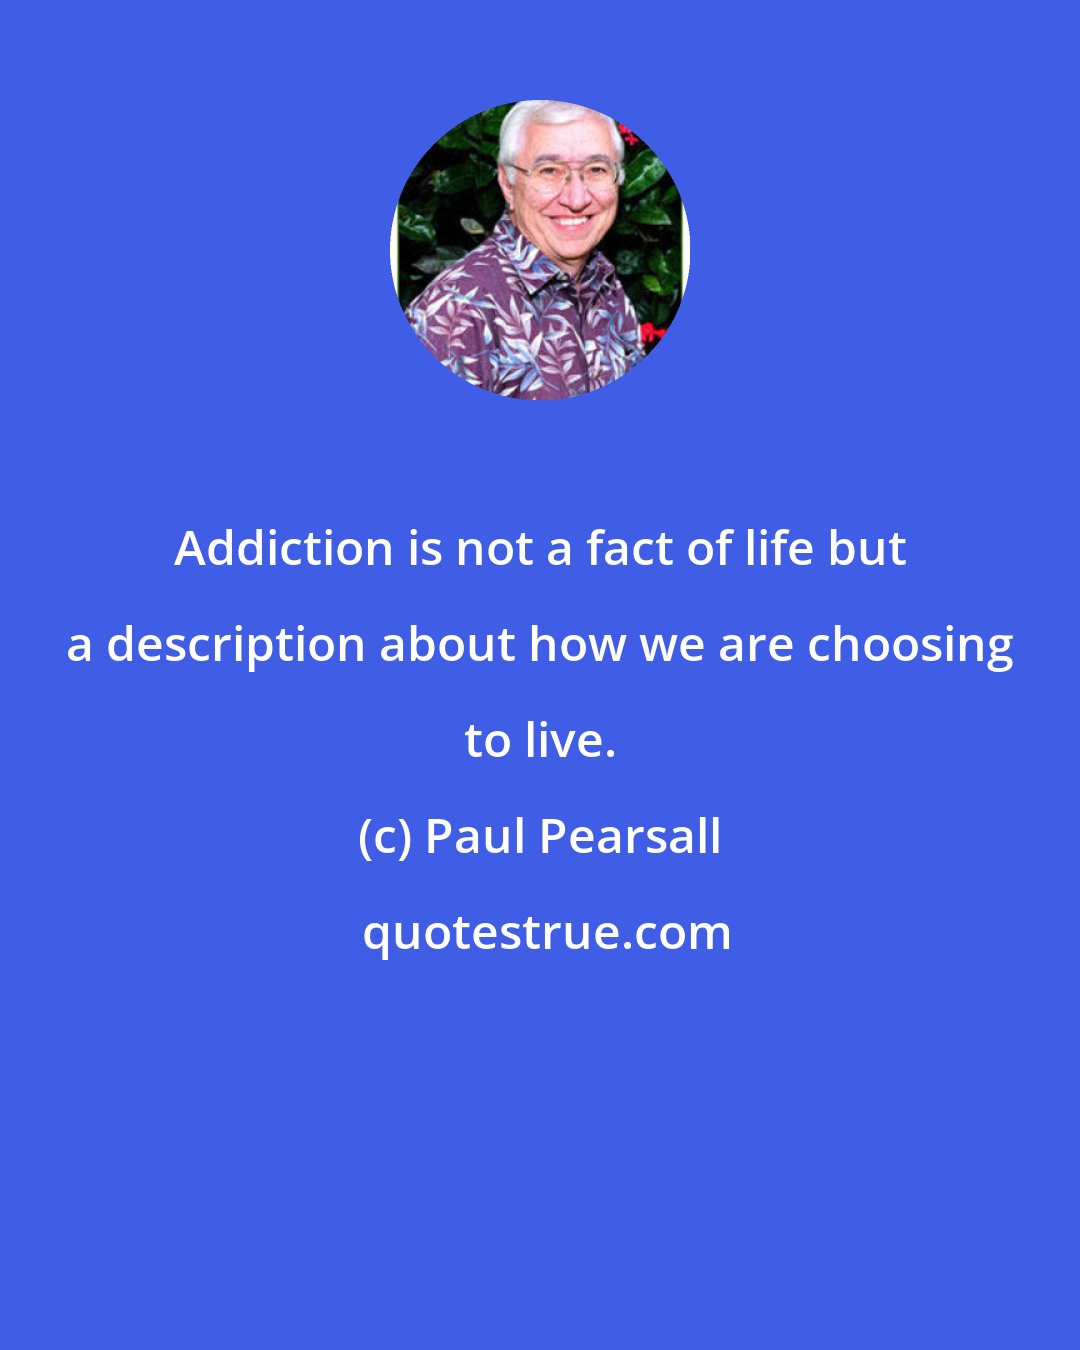 Paul Pearsall: Addiction is not a fact of life but a description about how we are choosing to live.